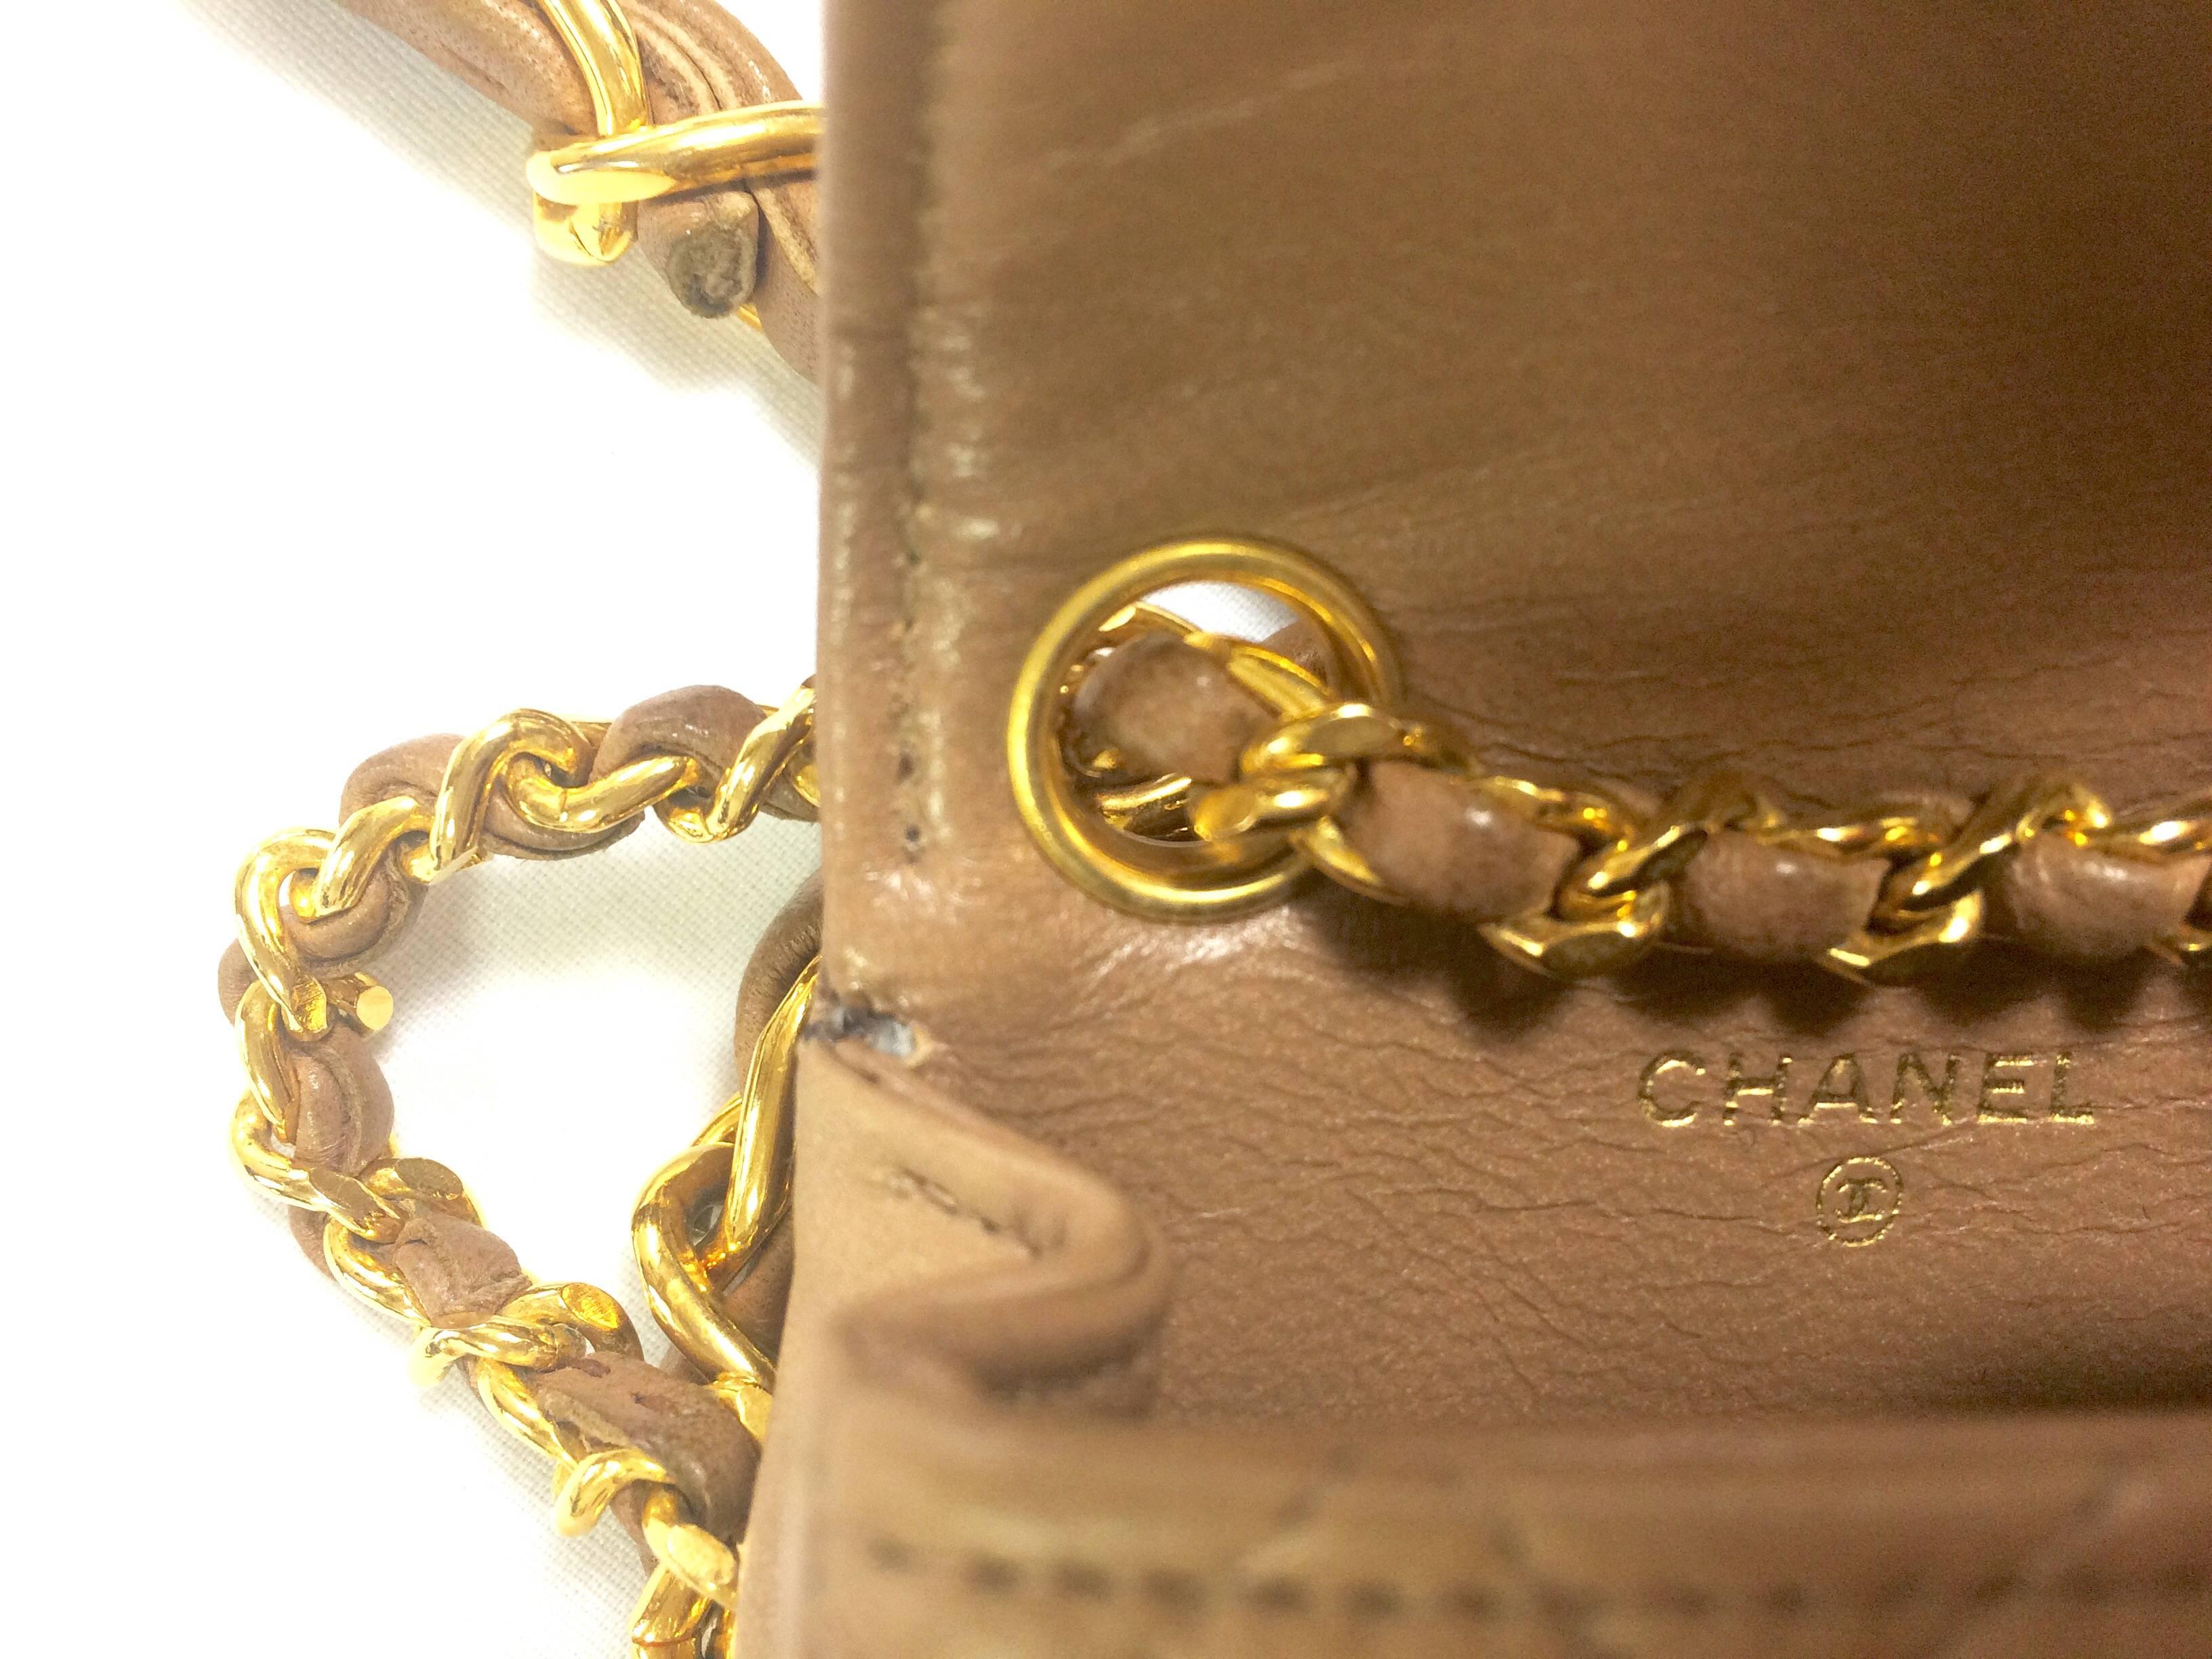 Vintage CHANEL brown lambskin mini 2.55 bag charm chain leather belt with CC. 2